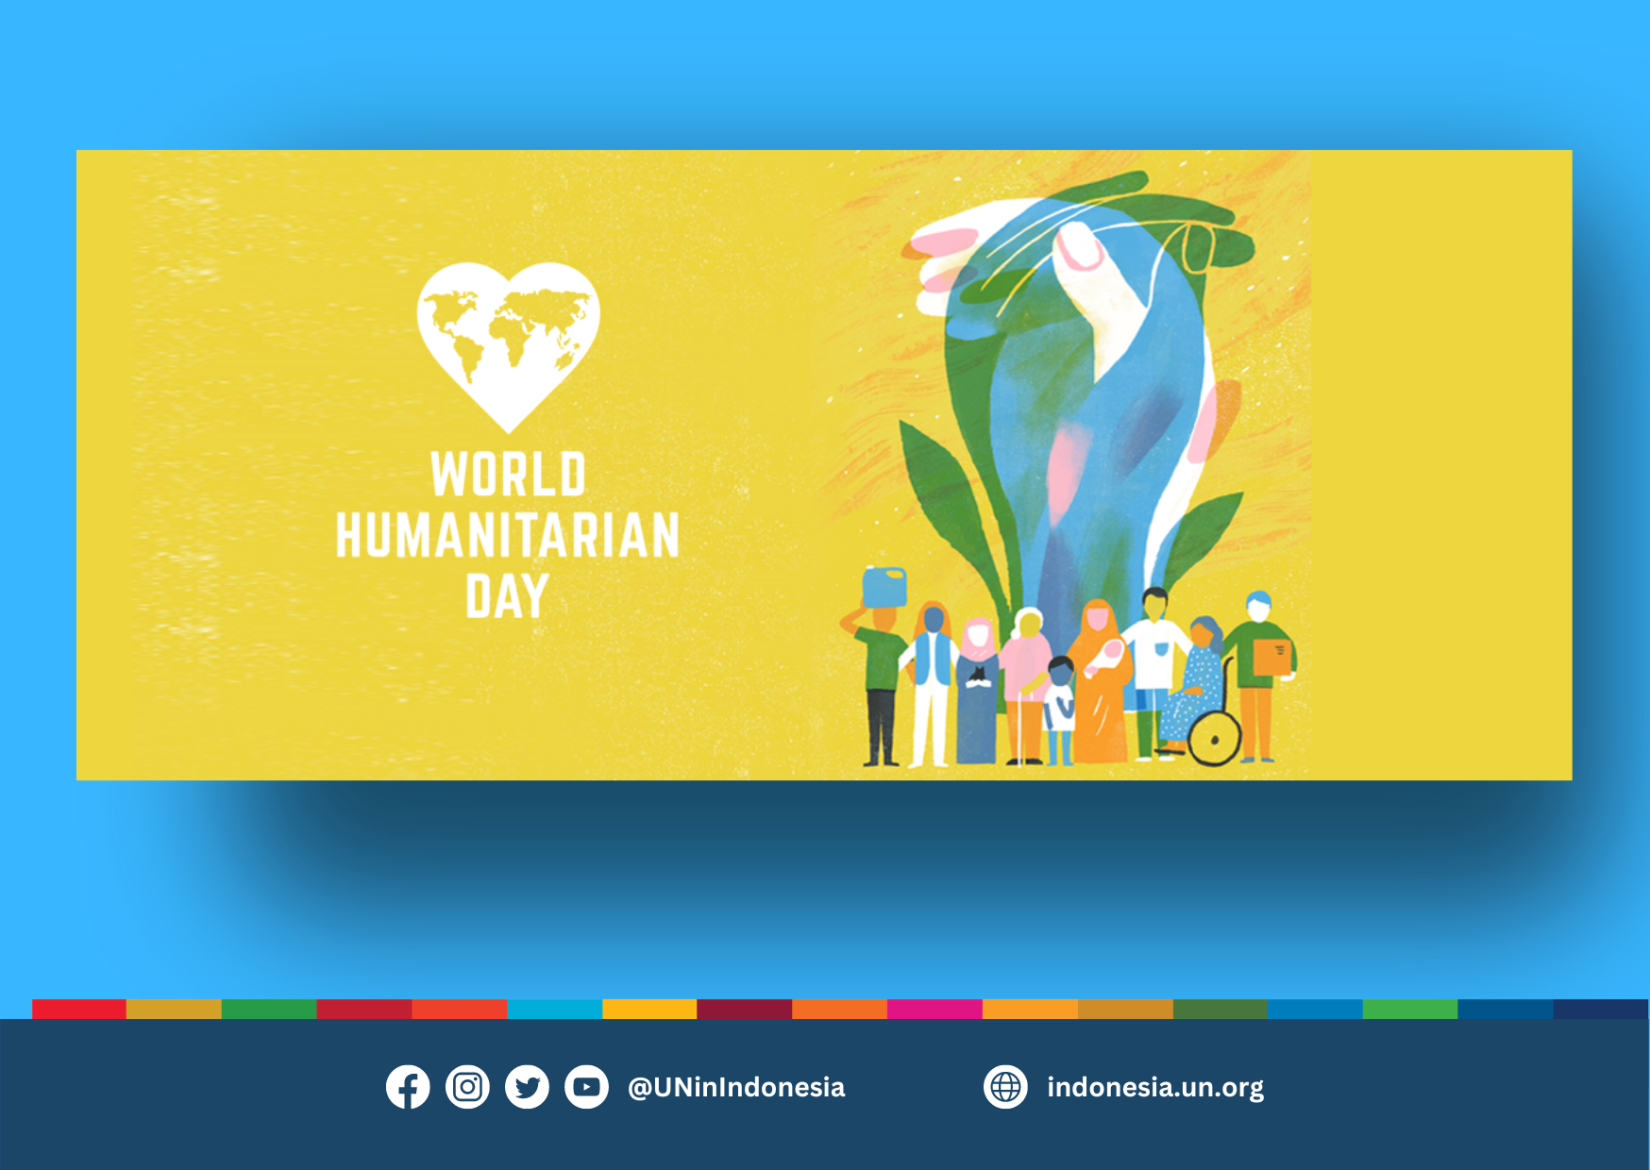 Promotion banner on World Humanitarian Day